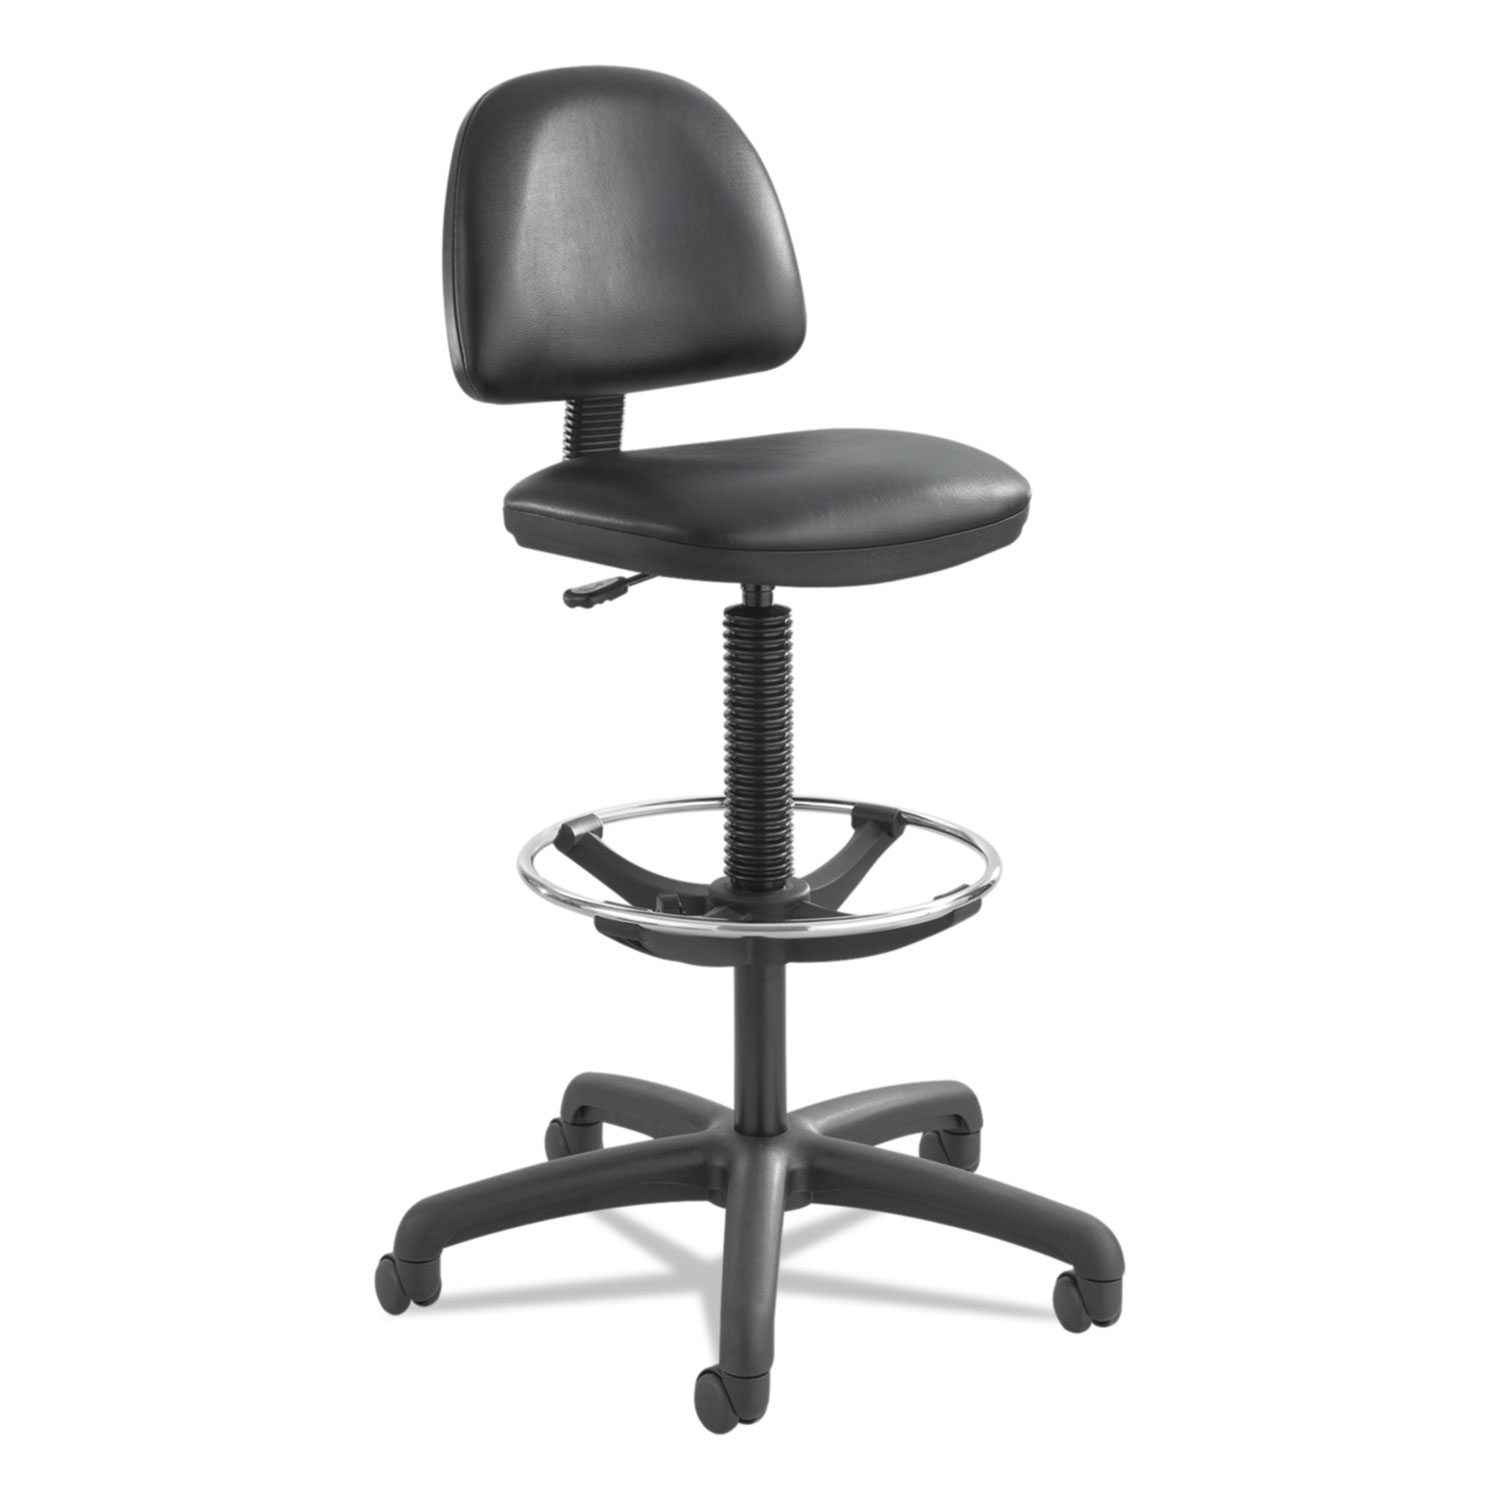  Safco 3406BL Precision Extended-Height Swivel Stool with Adjustable Footring, 33 Seat Height, Up to 250 lbs., Black Seat/Back, Black Base (SAF3406BL) 